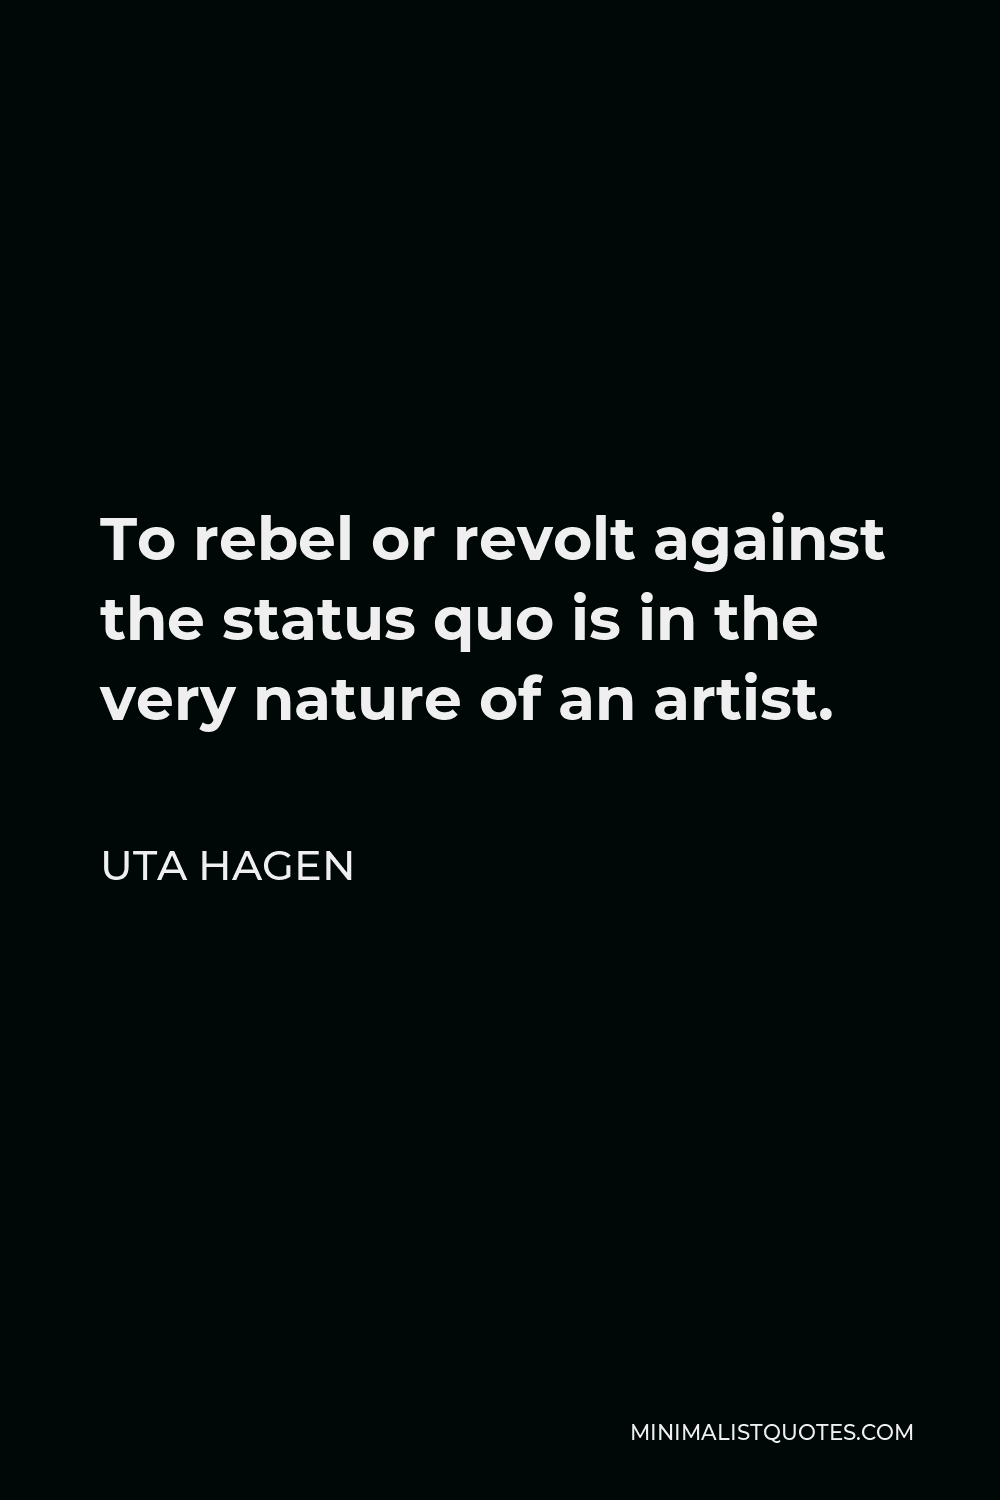 Uta Hagen Quote - To rebel or revolt against the status quo is in the very nature of an artist.